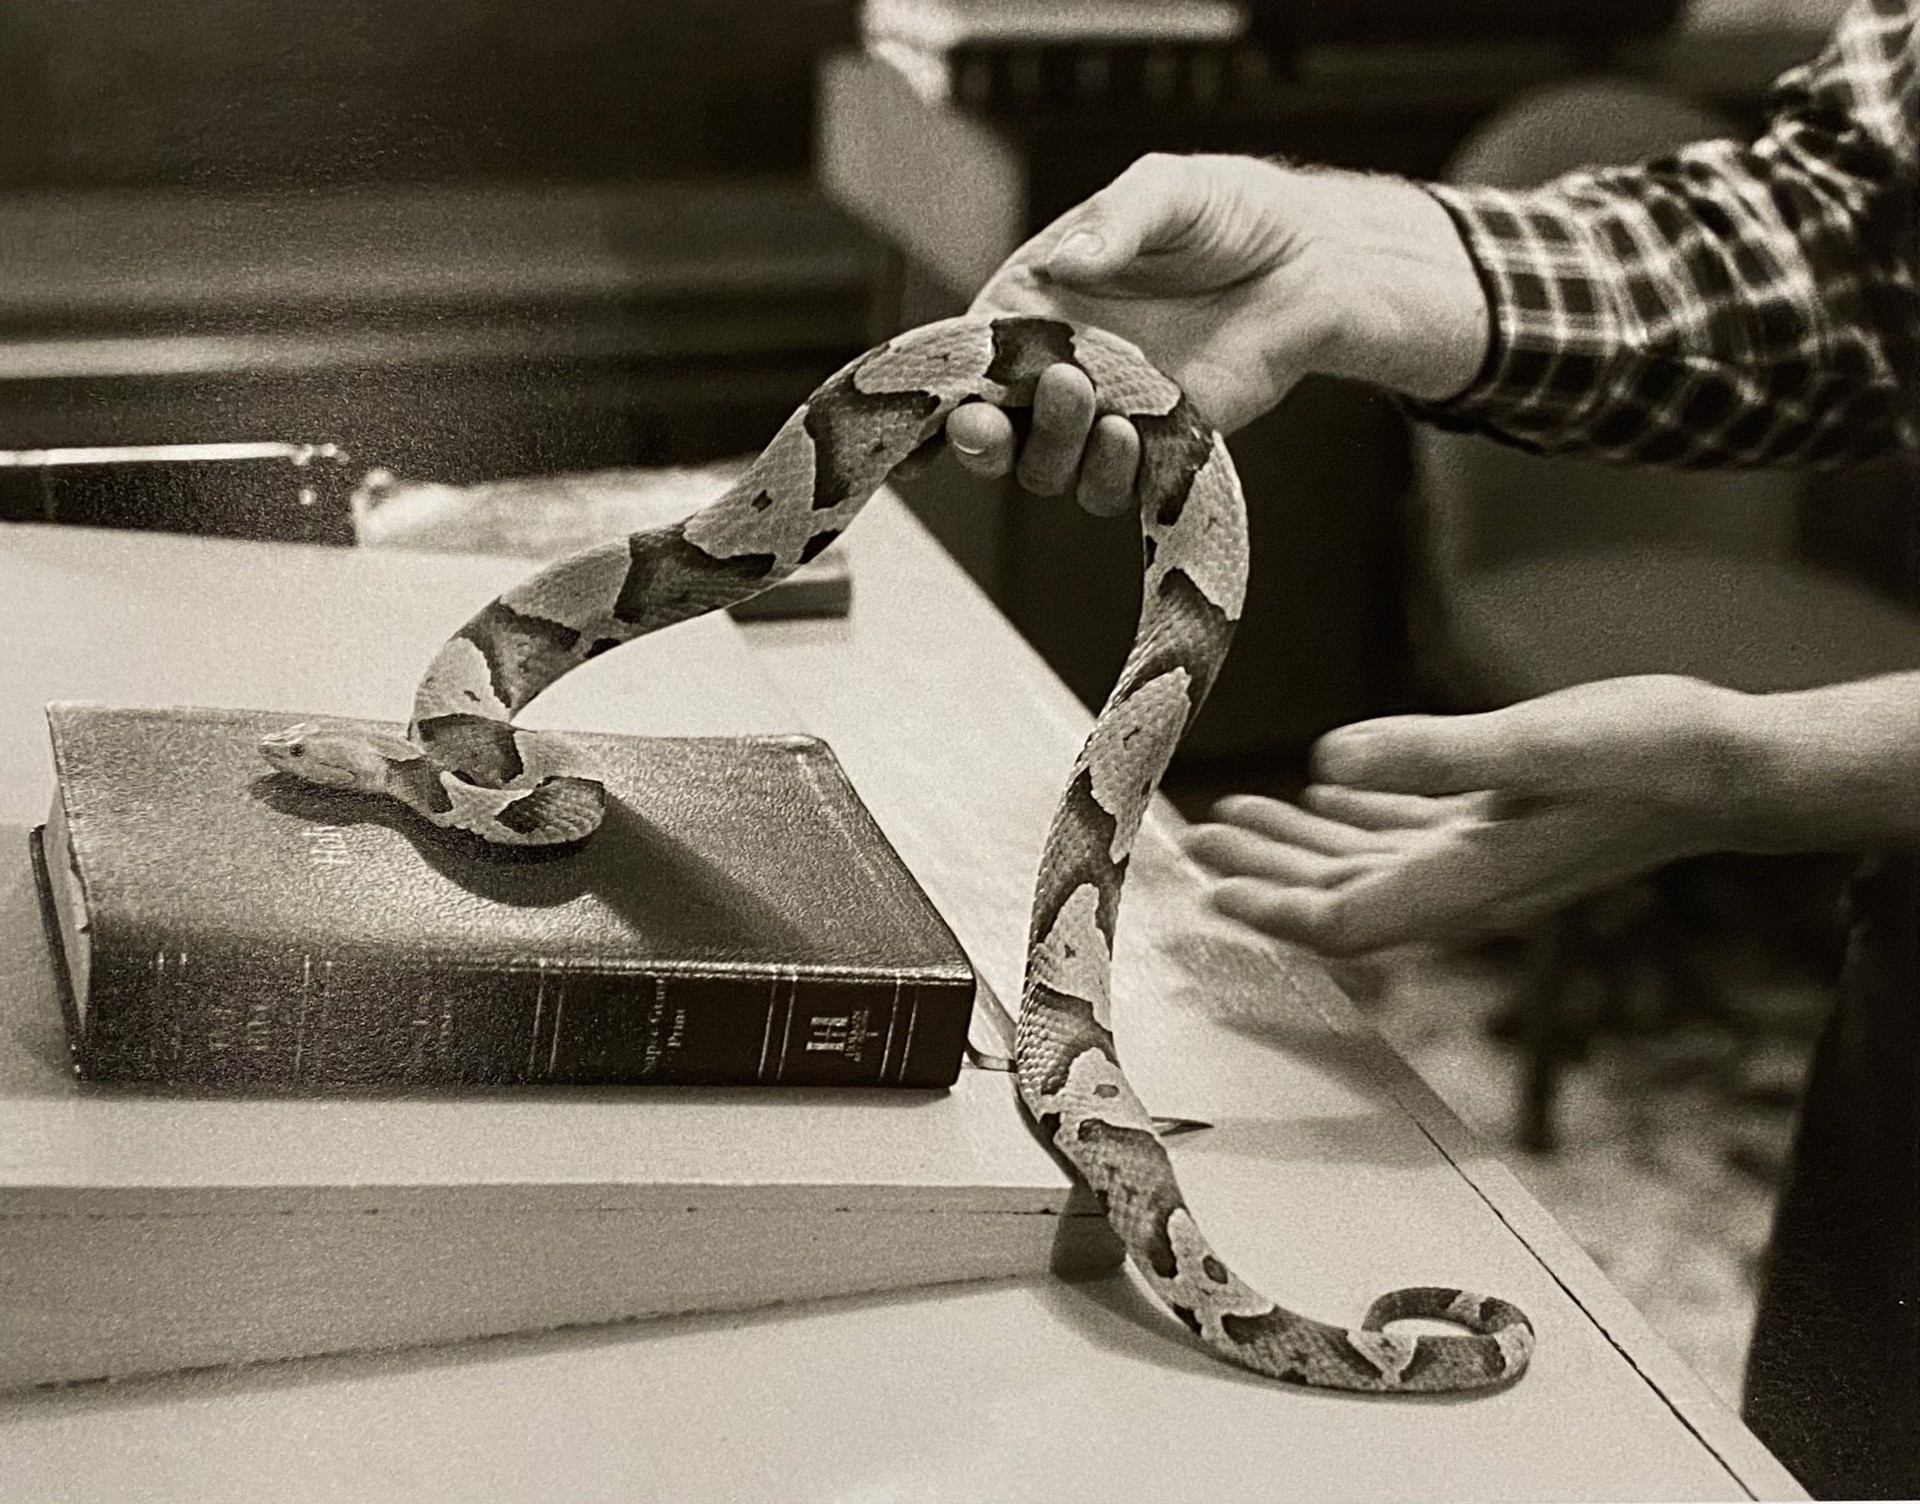 Serpent on The Bible by Don Dudenbostel